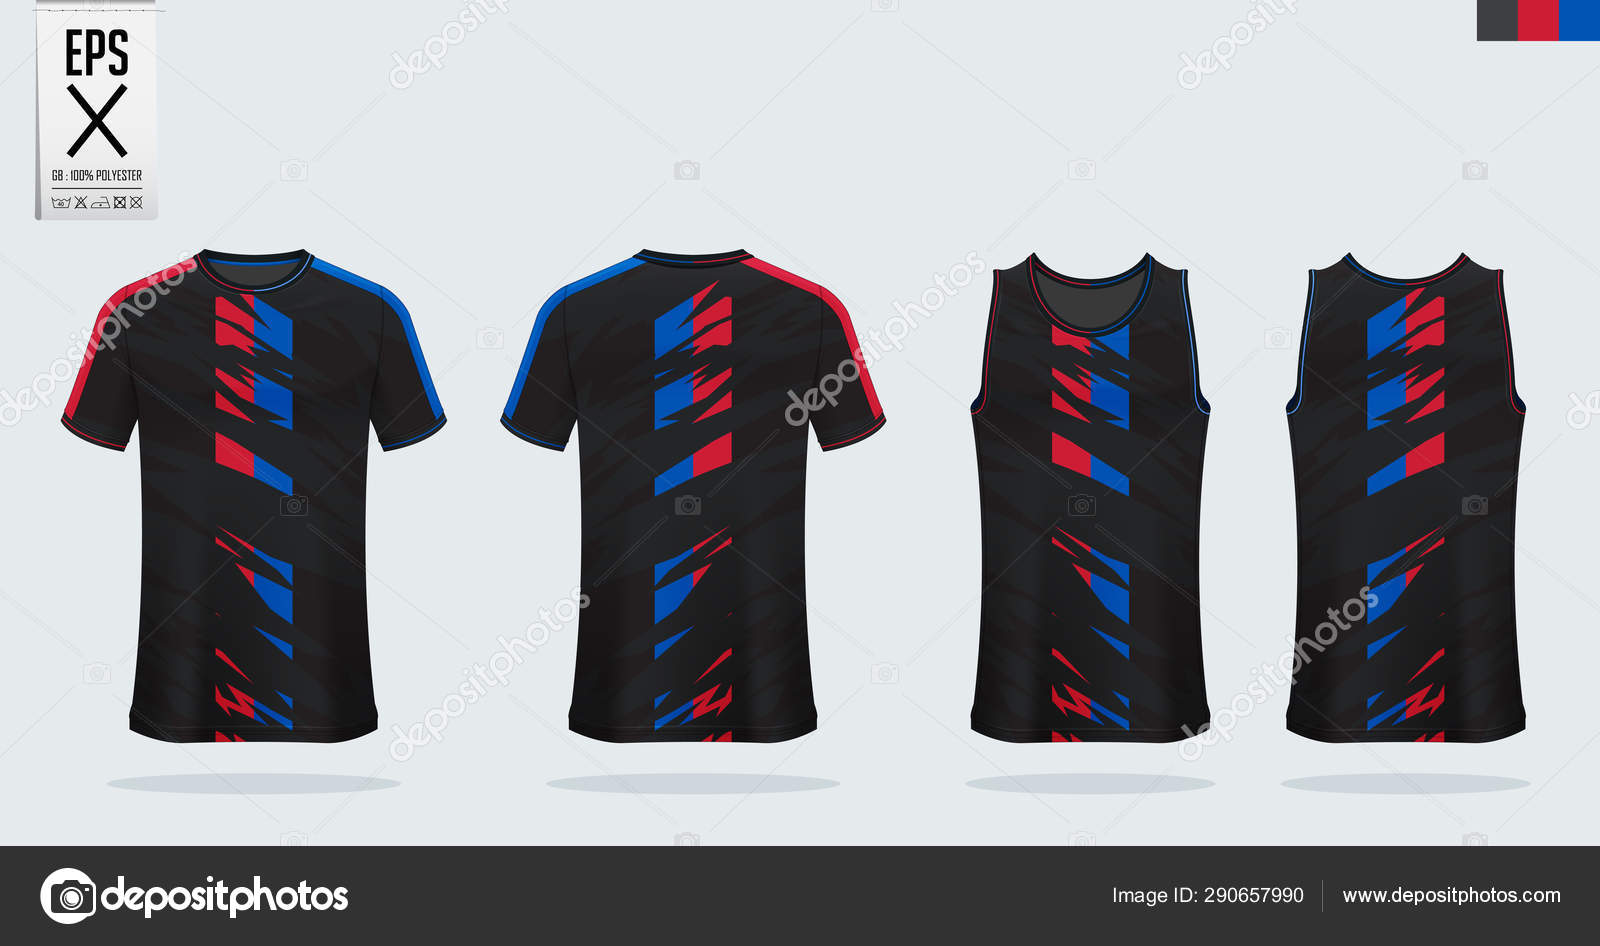 Download T Shirt Sport Mockup Template Design For Soccer Jersey Football Kit Tank Top For Basketball Jersey And Running Singlet Sport Uniform In Front And Back View Vector Vector Image By C Tond Ruangwit Gmail Com